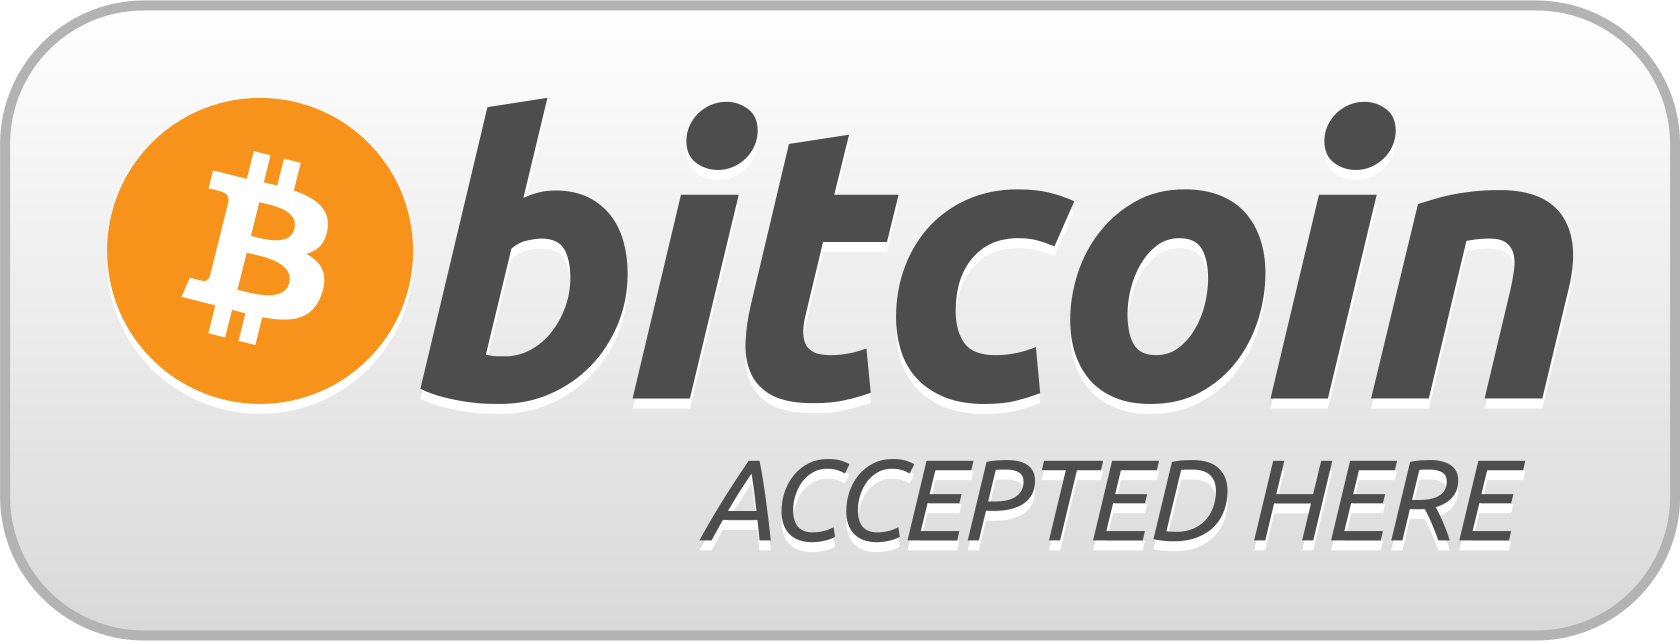 Bitcoin-accepted-here.png